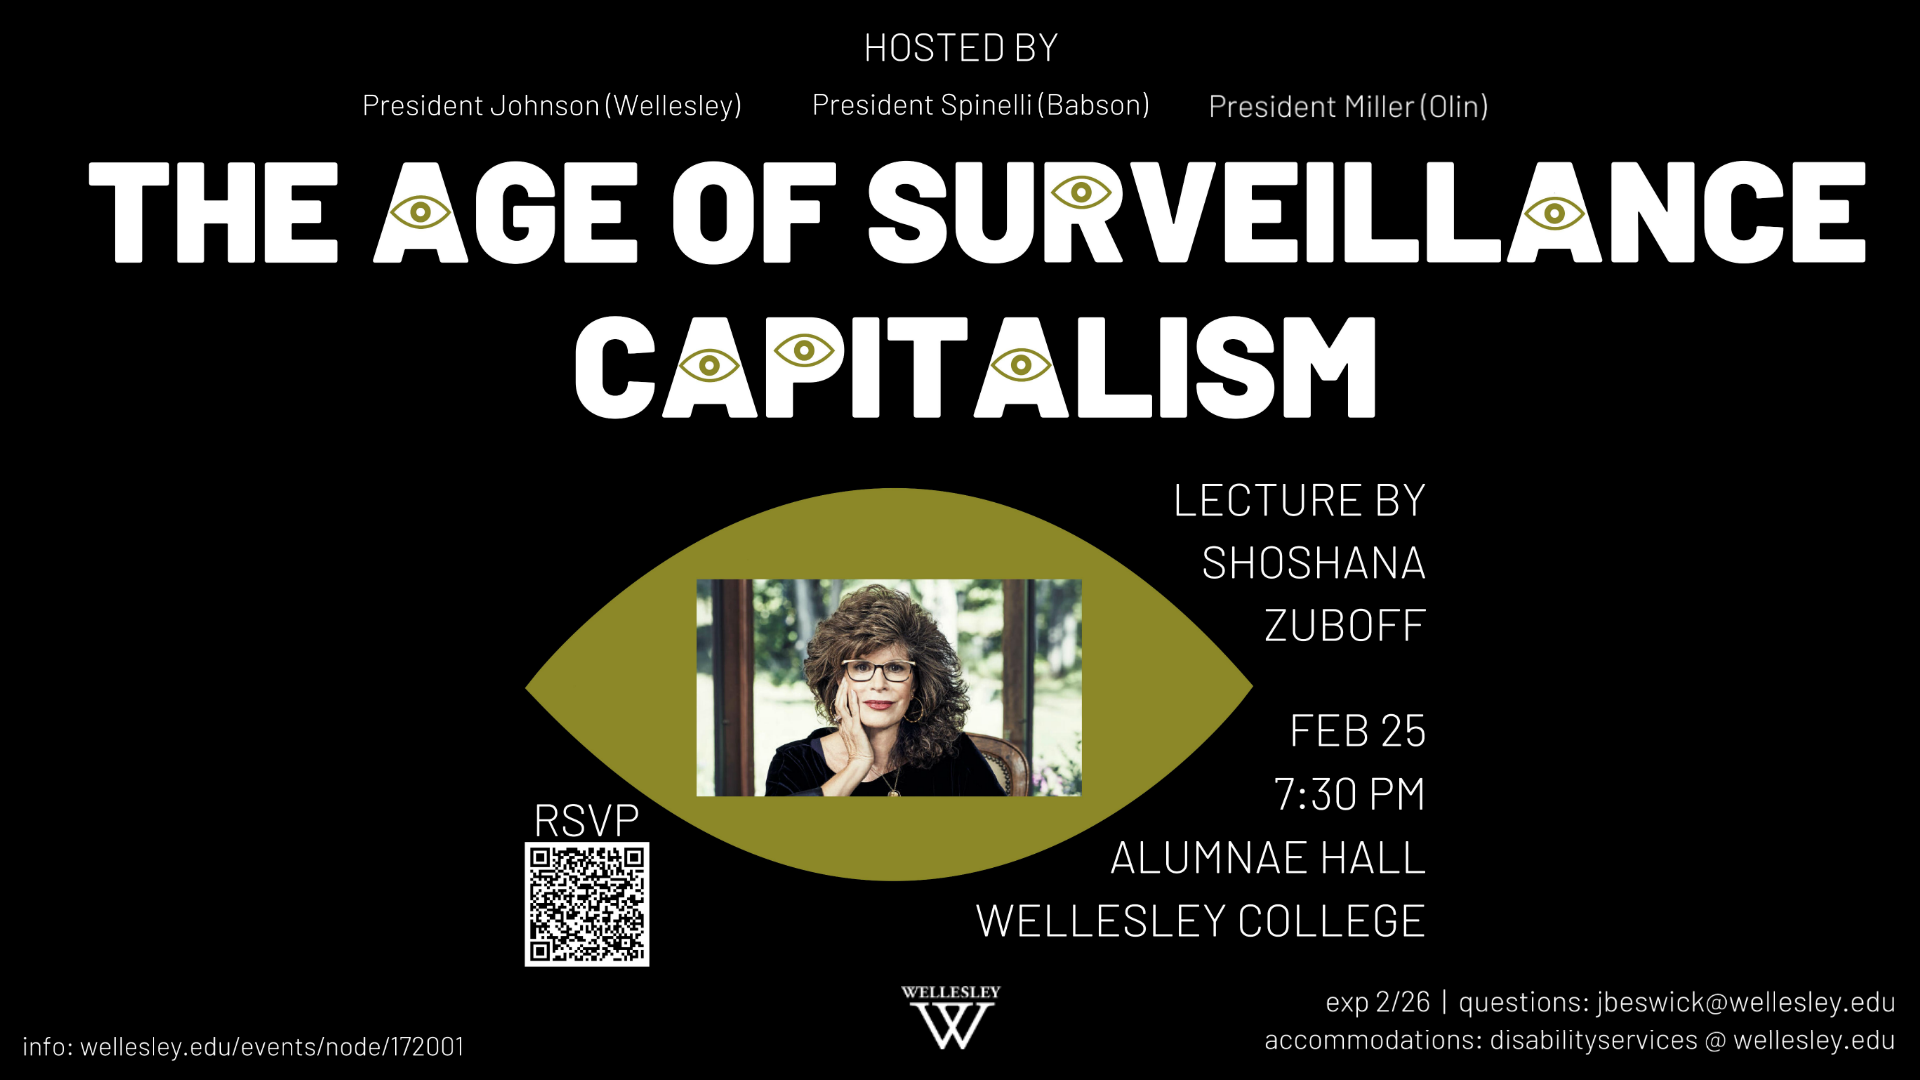 Poster on Shoshana Zuboff's lecture 